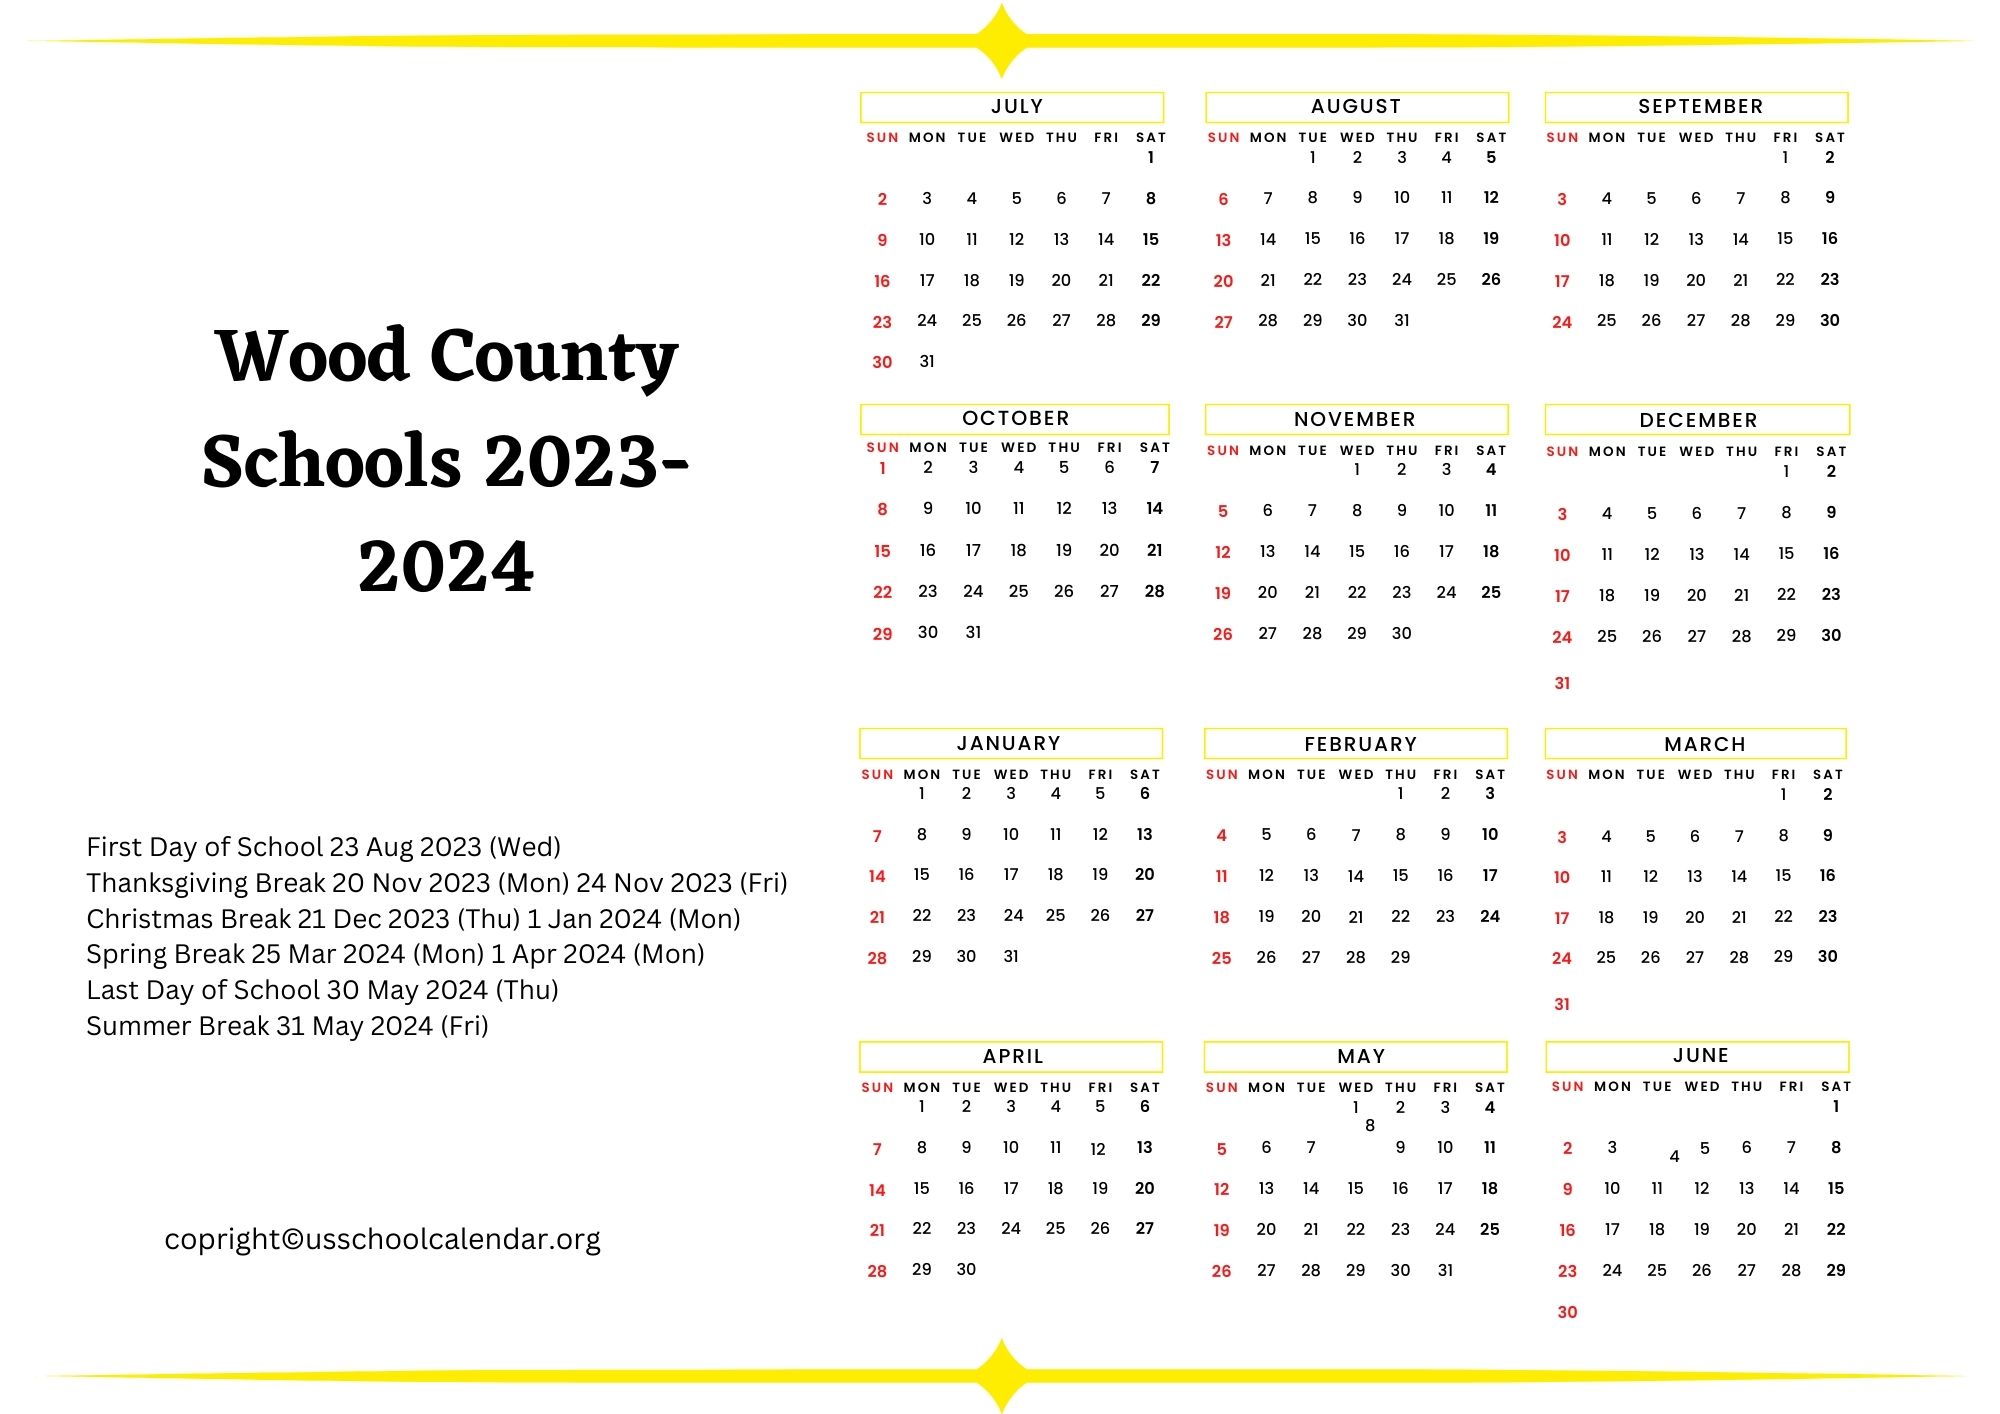 Wood County Schools Calendar with Holidays 2023 2024